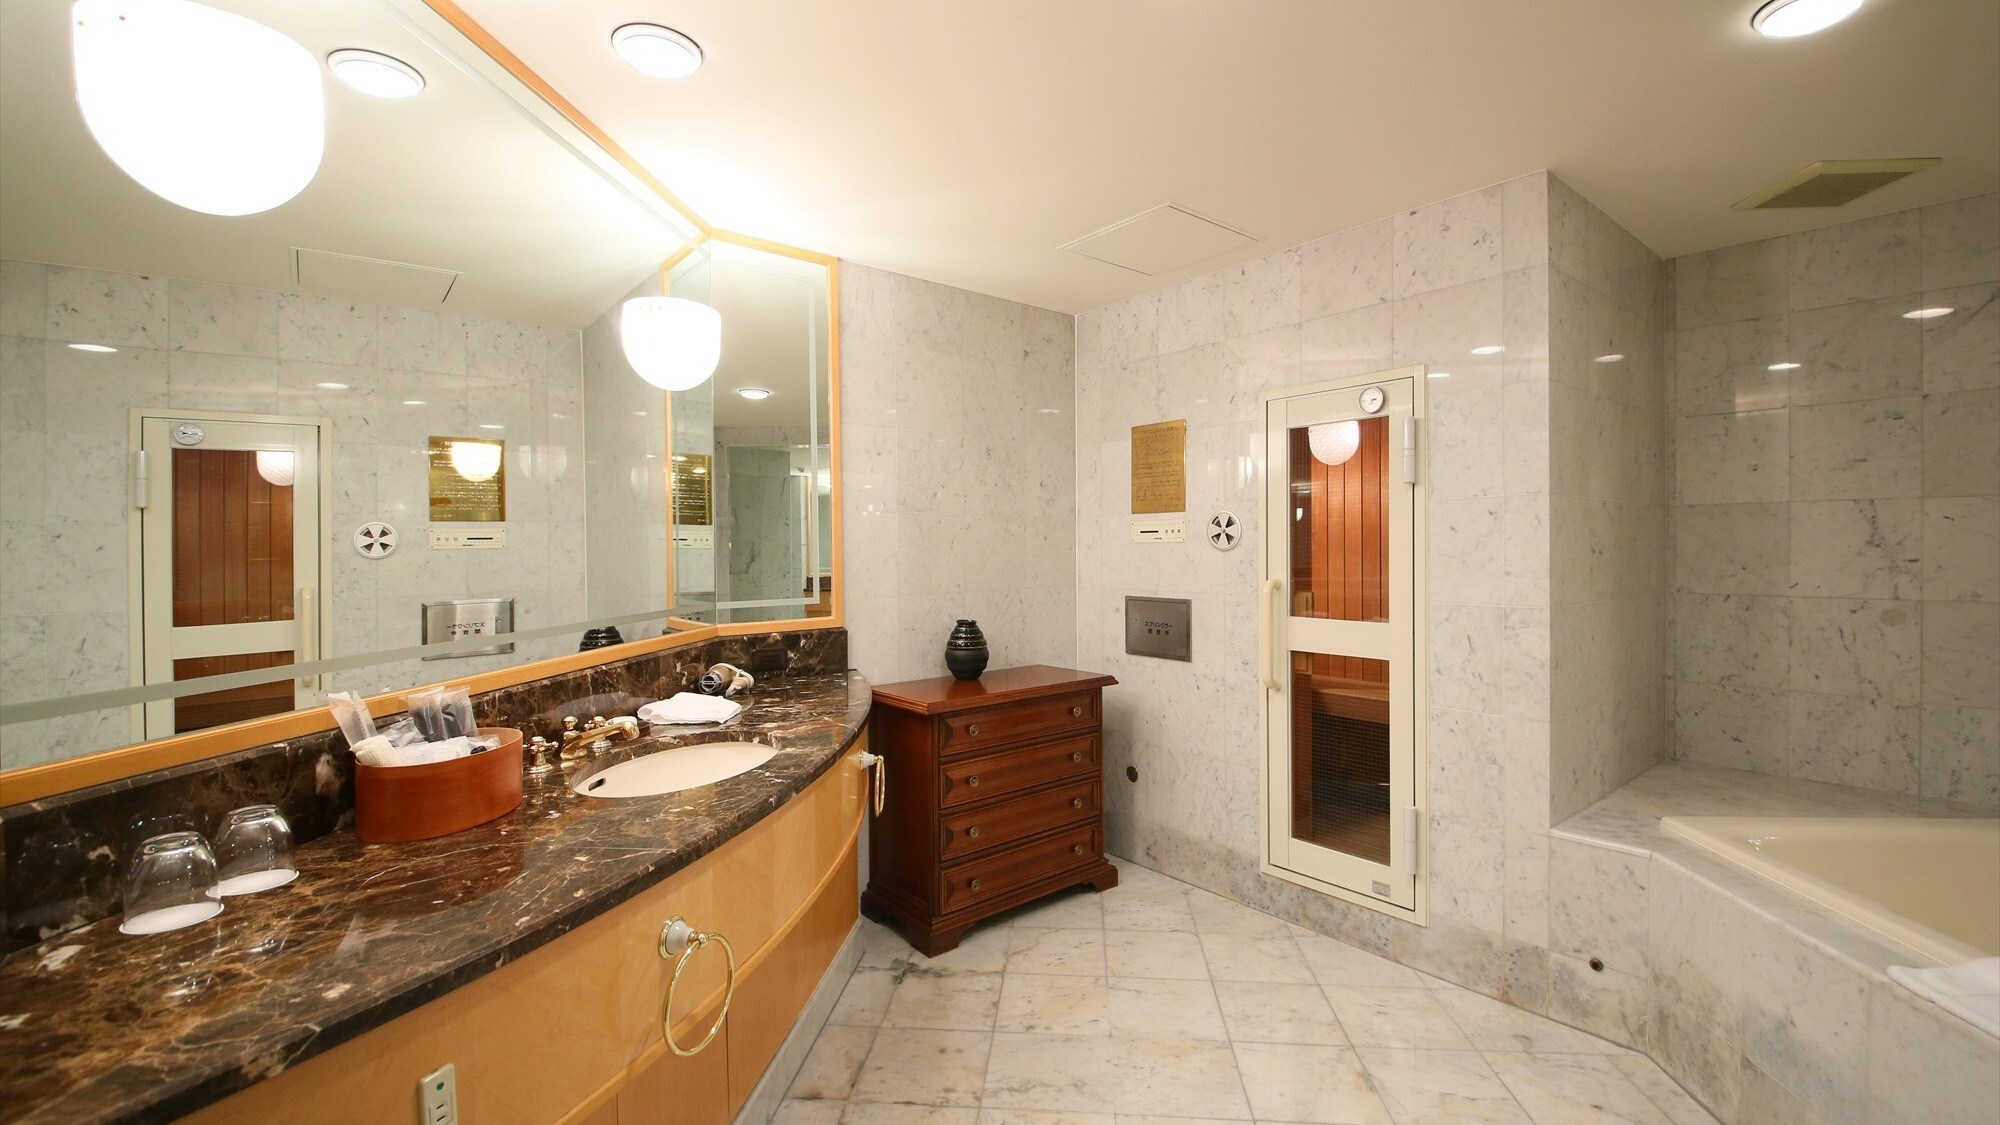 ◆Superior Suite｜A room with a large bathroom and a private sauna.